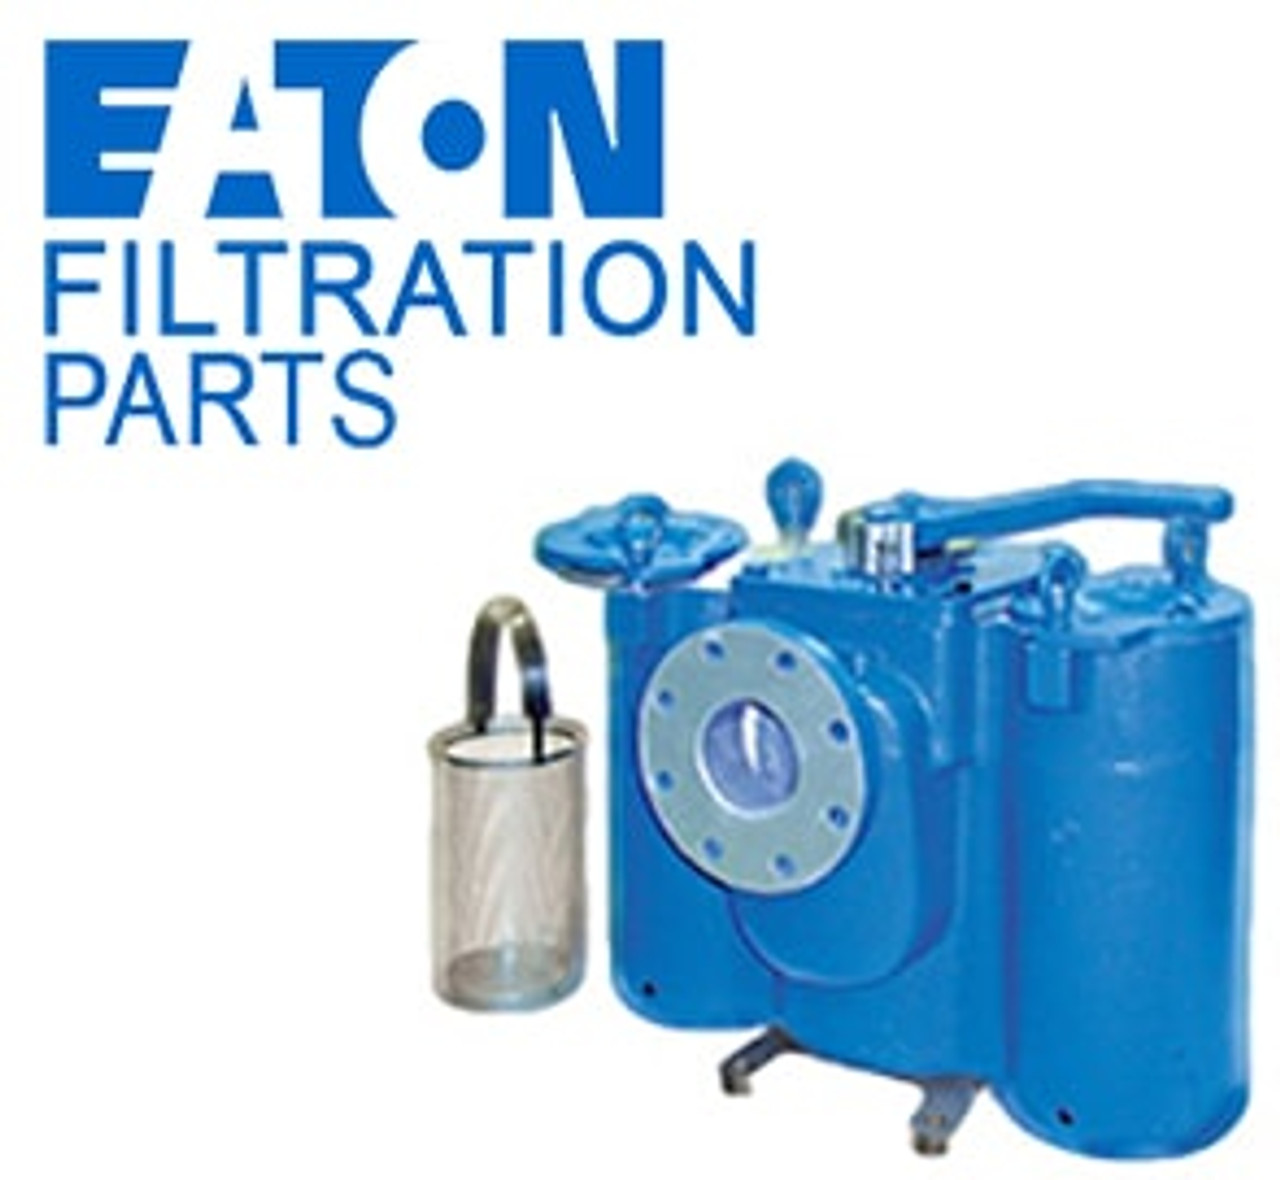 EATON Part Number 2375000593